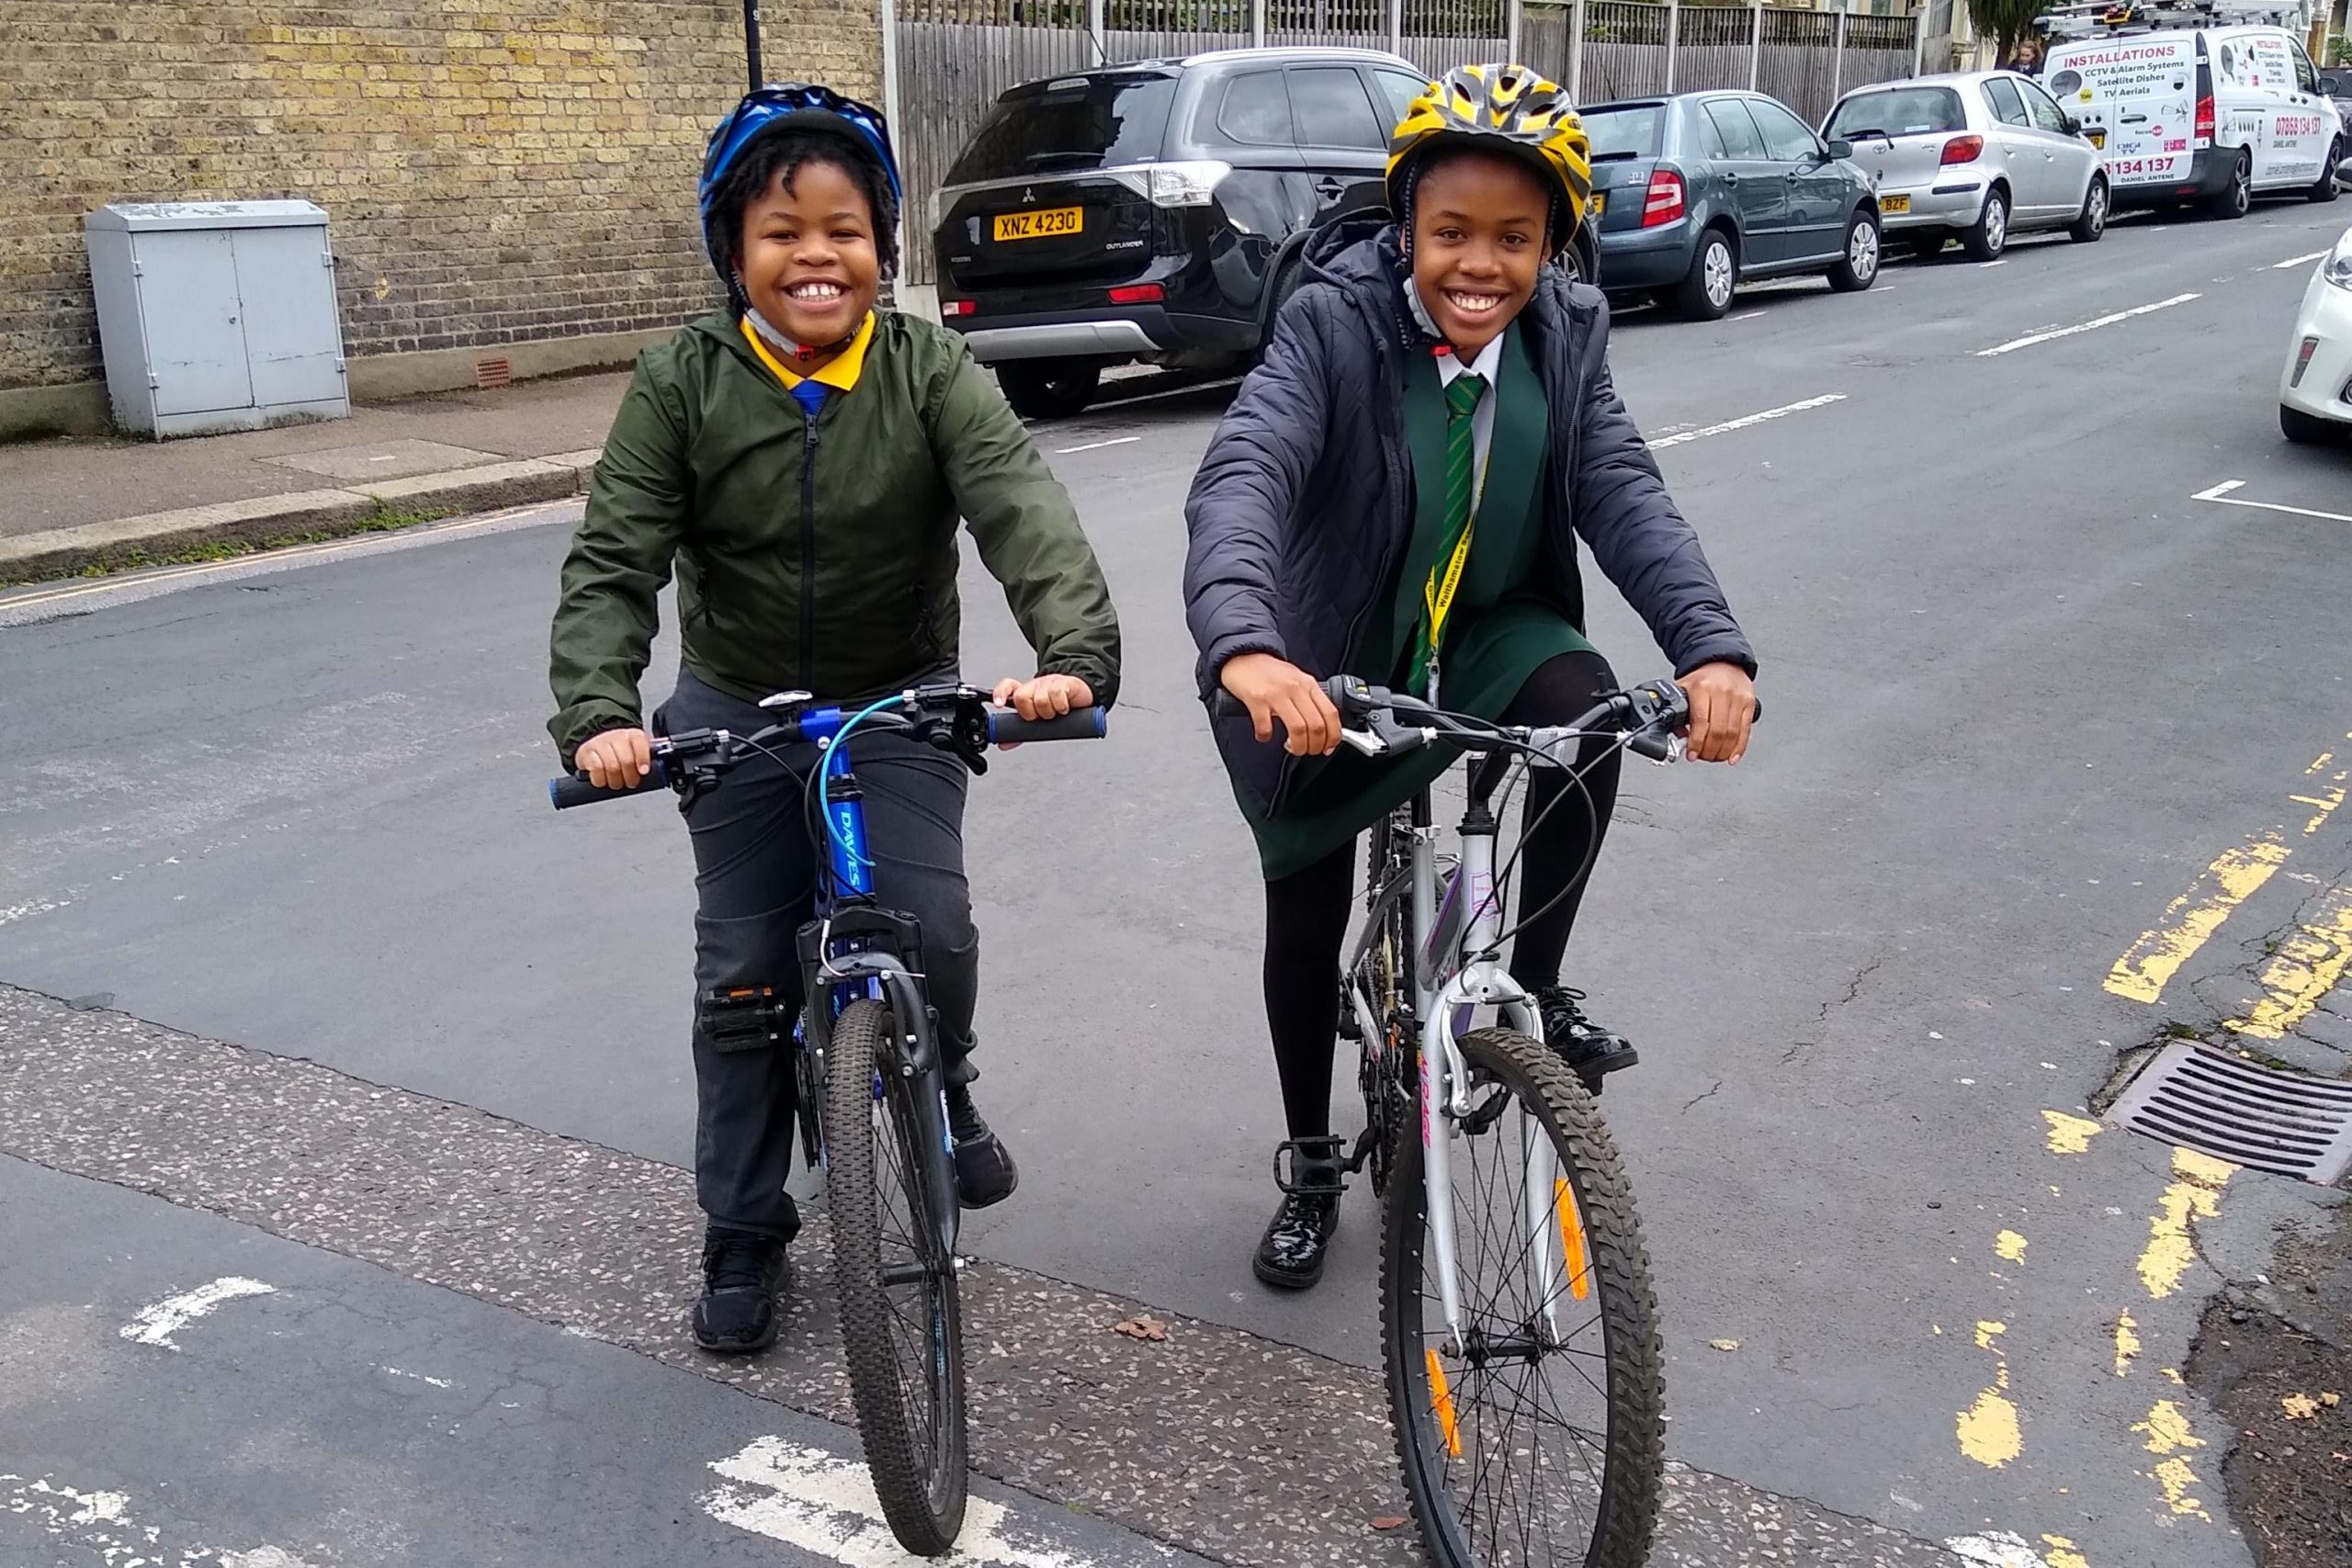 Smiling kids on bikes with helmets waiting at a junction